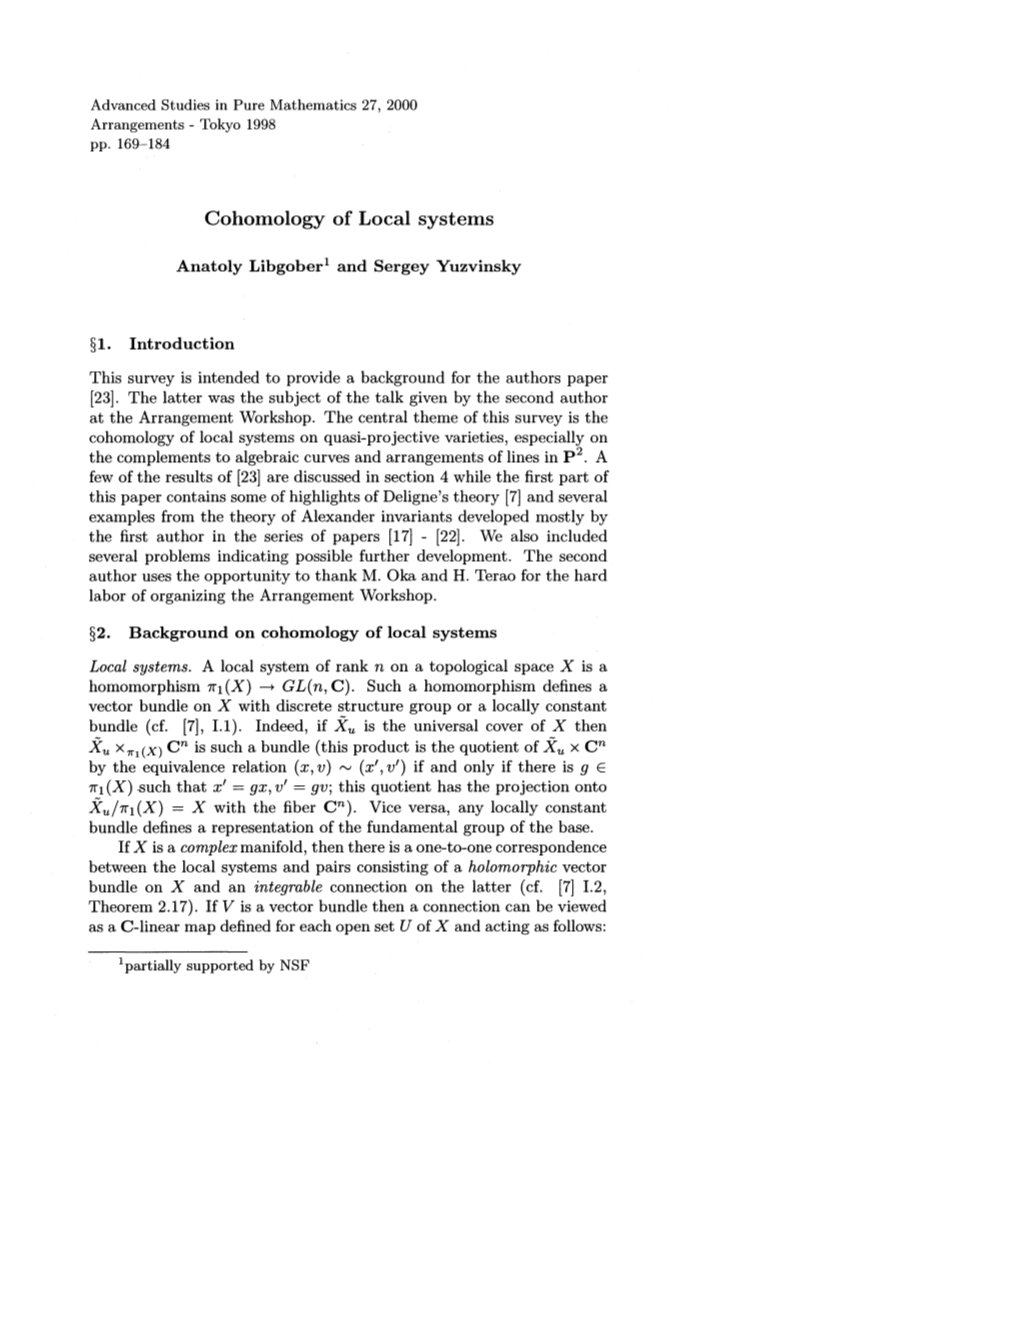 Cohomology of Local Systems